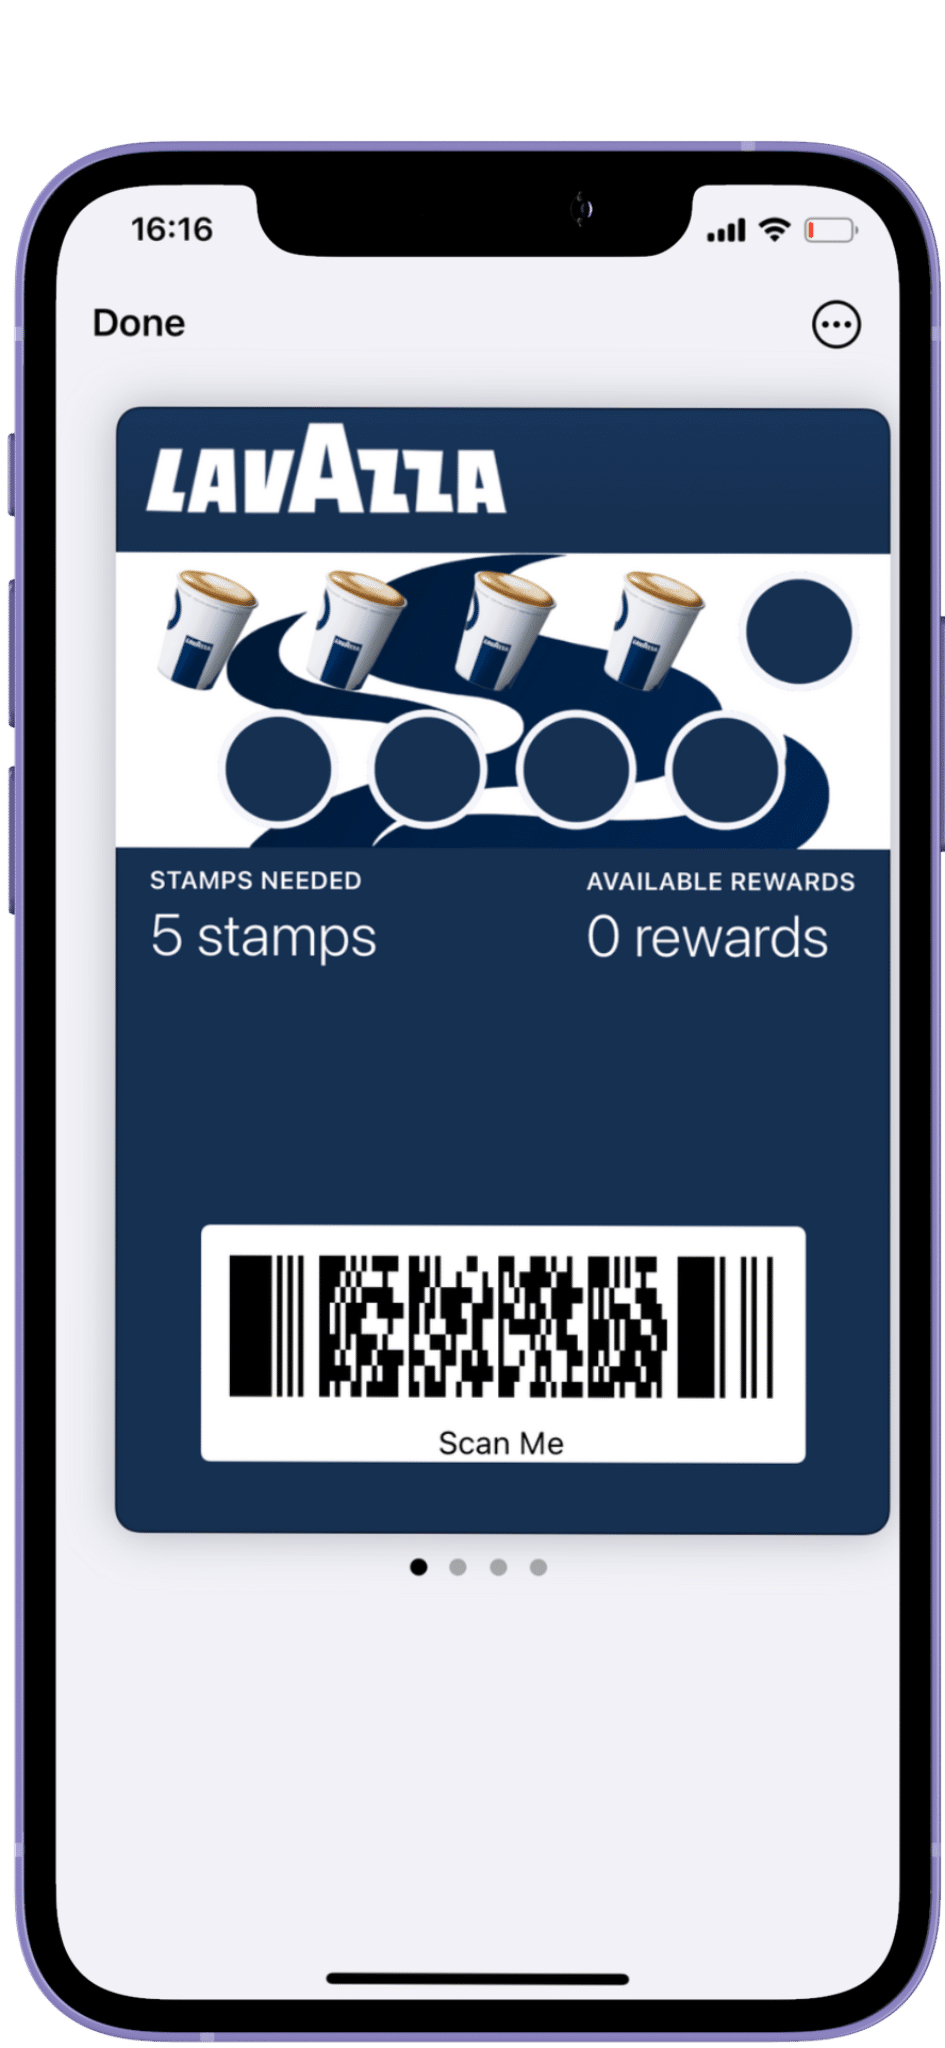 A smartphone screen displaying a lavazza loyalty card app with a barcode and indicating "5 stamps needed" and "0 rewards available".